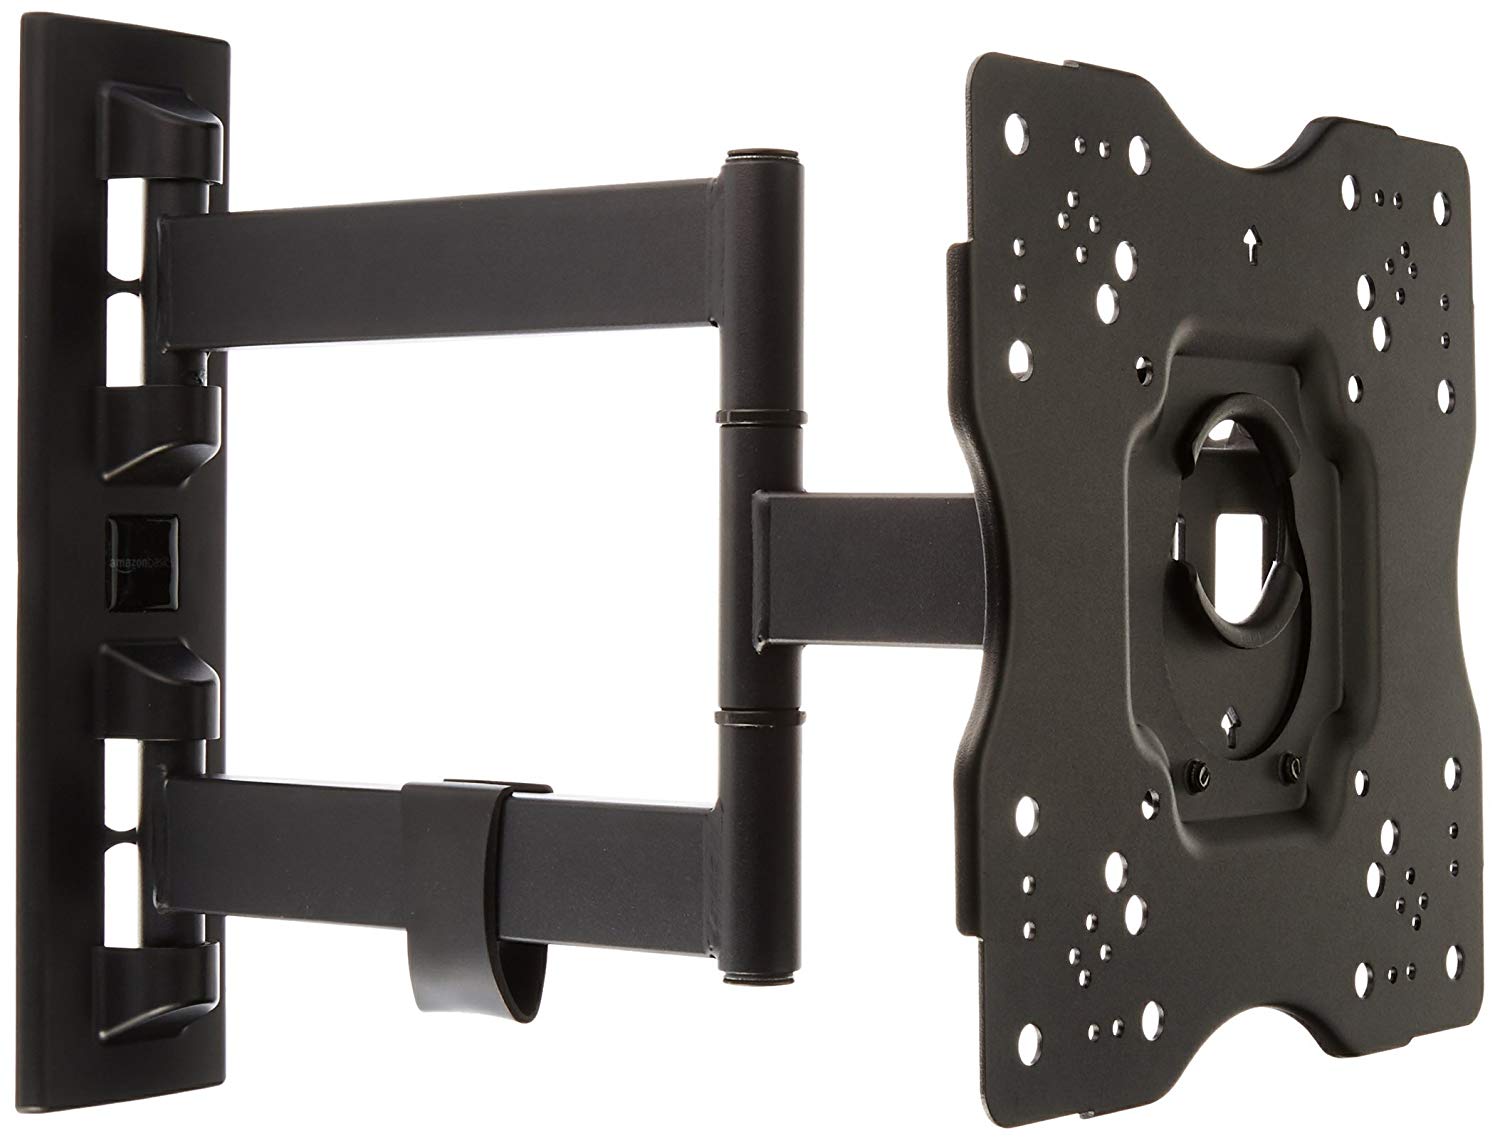 Amazon Electric Fireplace Fresh Amazonbasics Heavy Duty Full Motion Articulating Tv Wall Mount for 22 Inch to 55 Inch Led Lcd Flat Screen Tvs